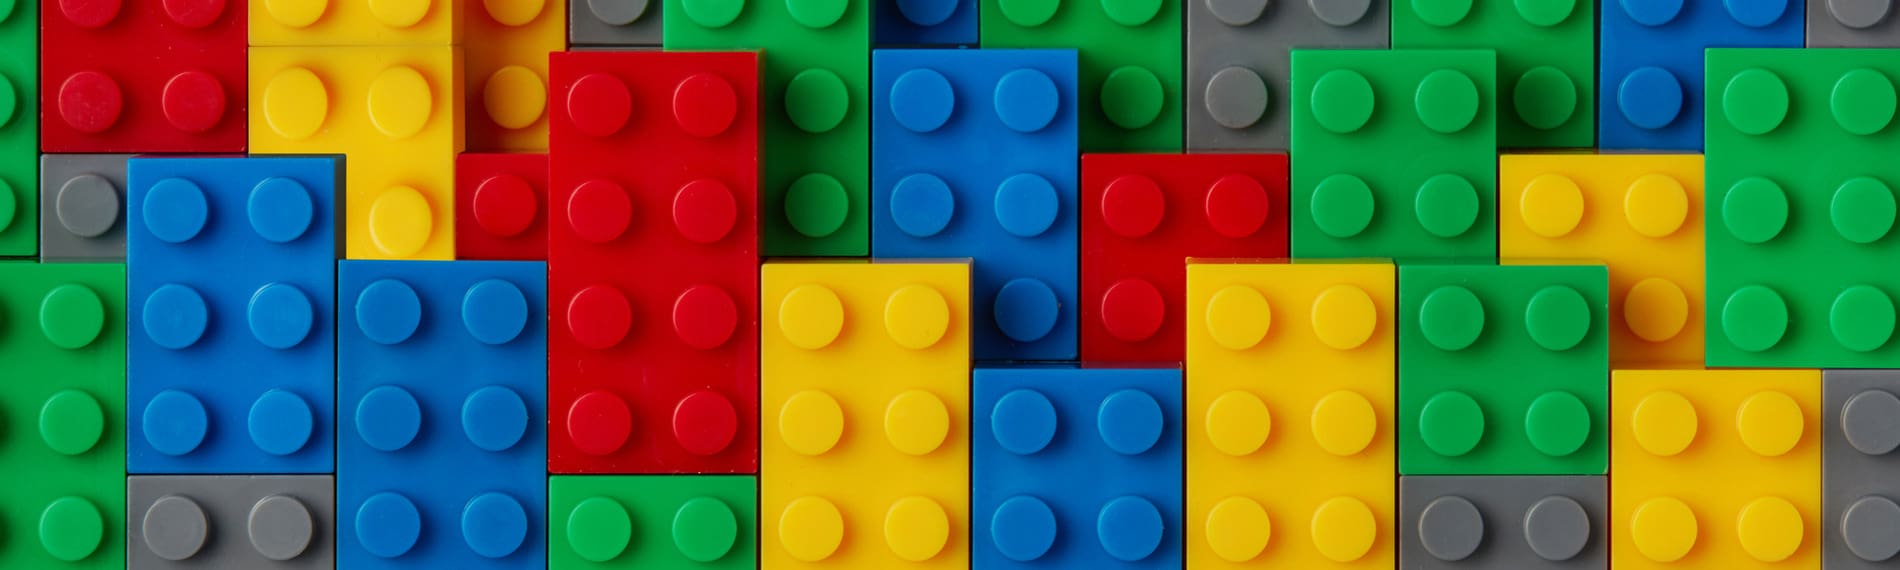 What Can Retailers Learn from LEGO’s Success?